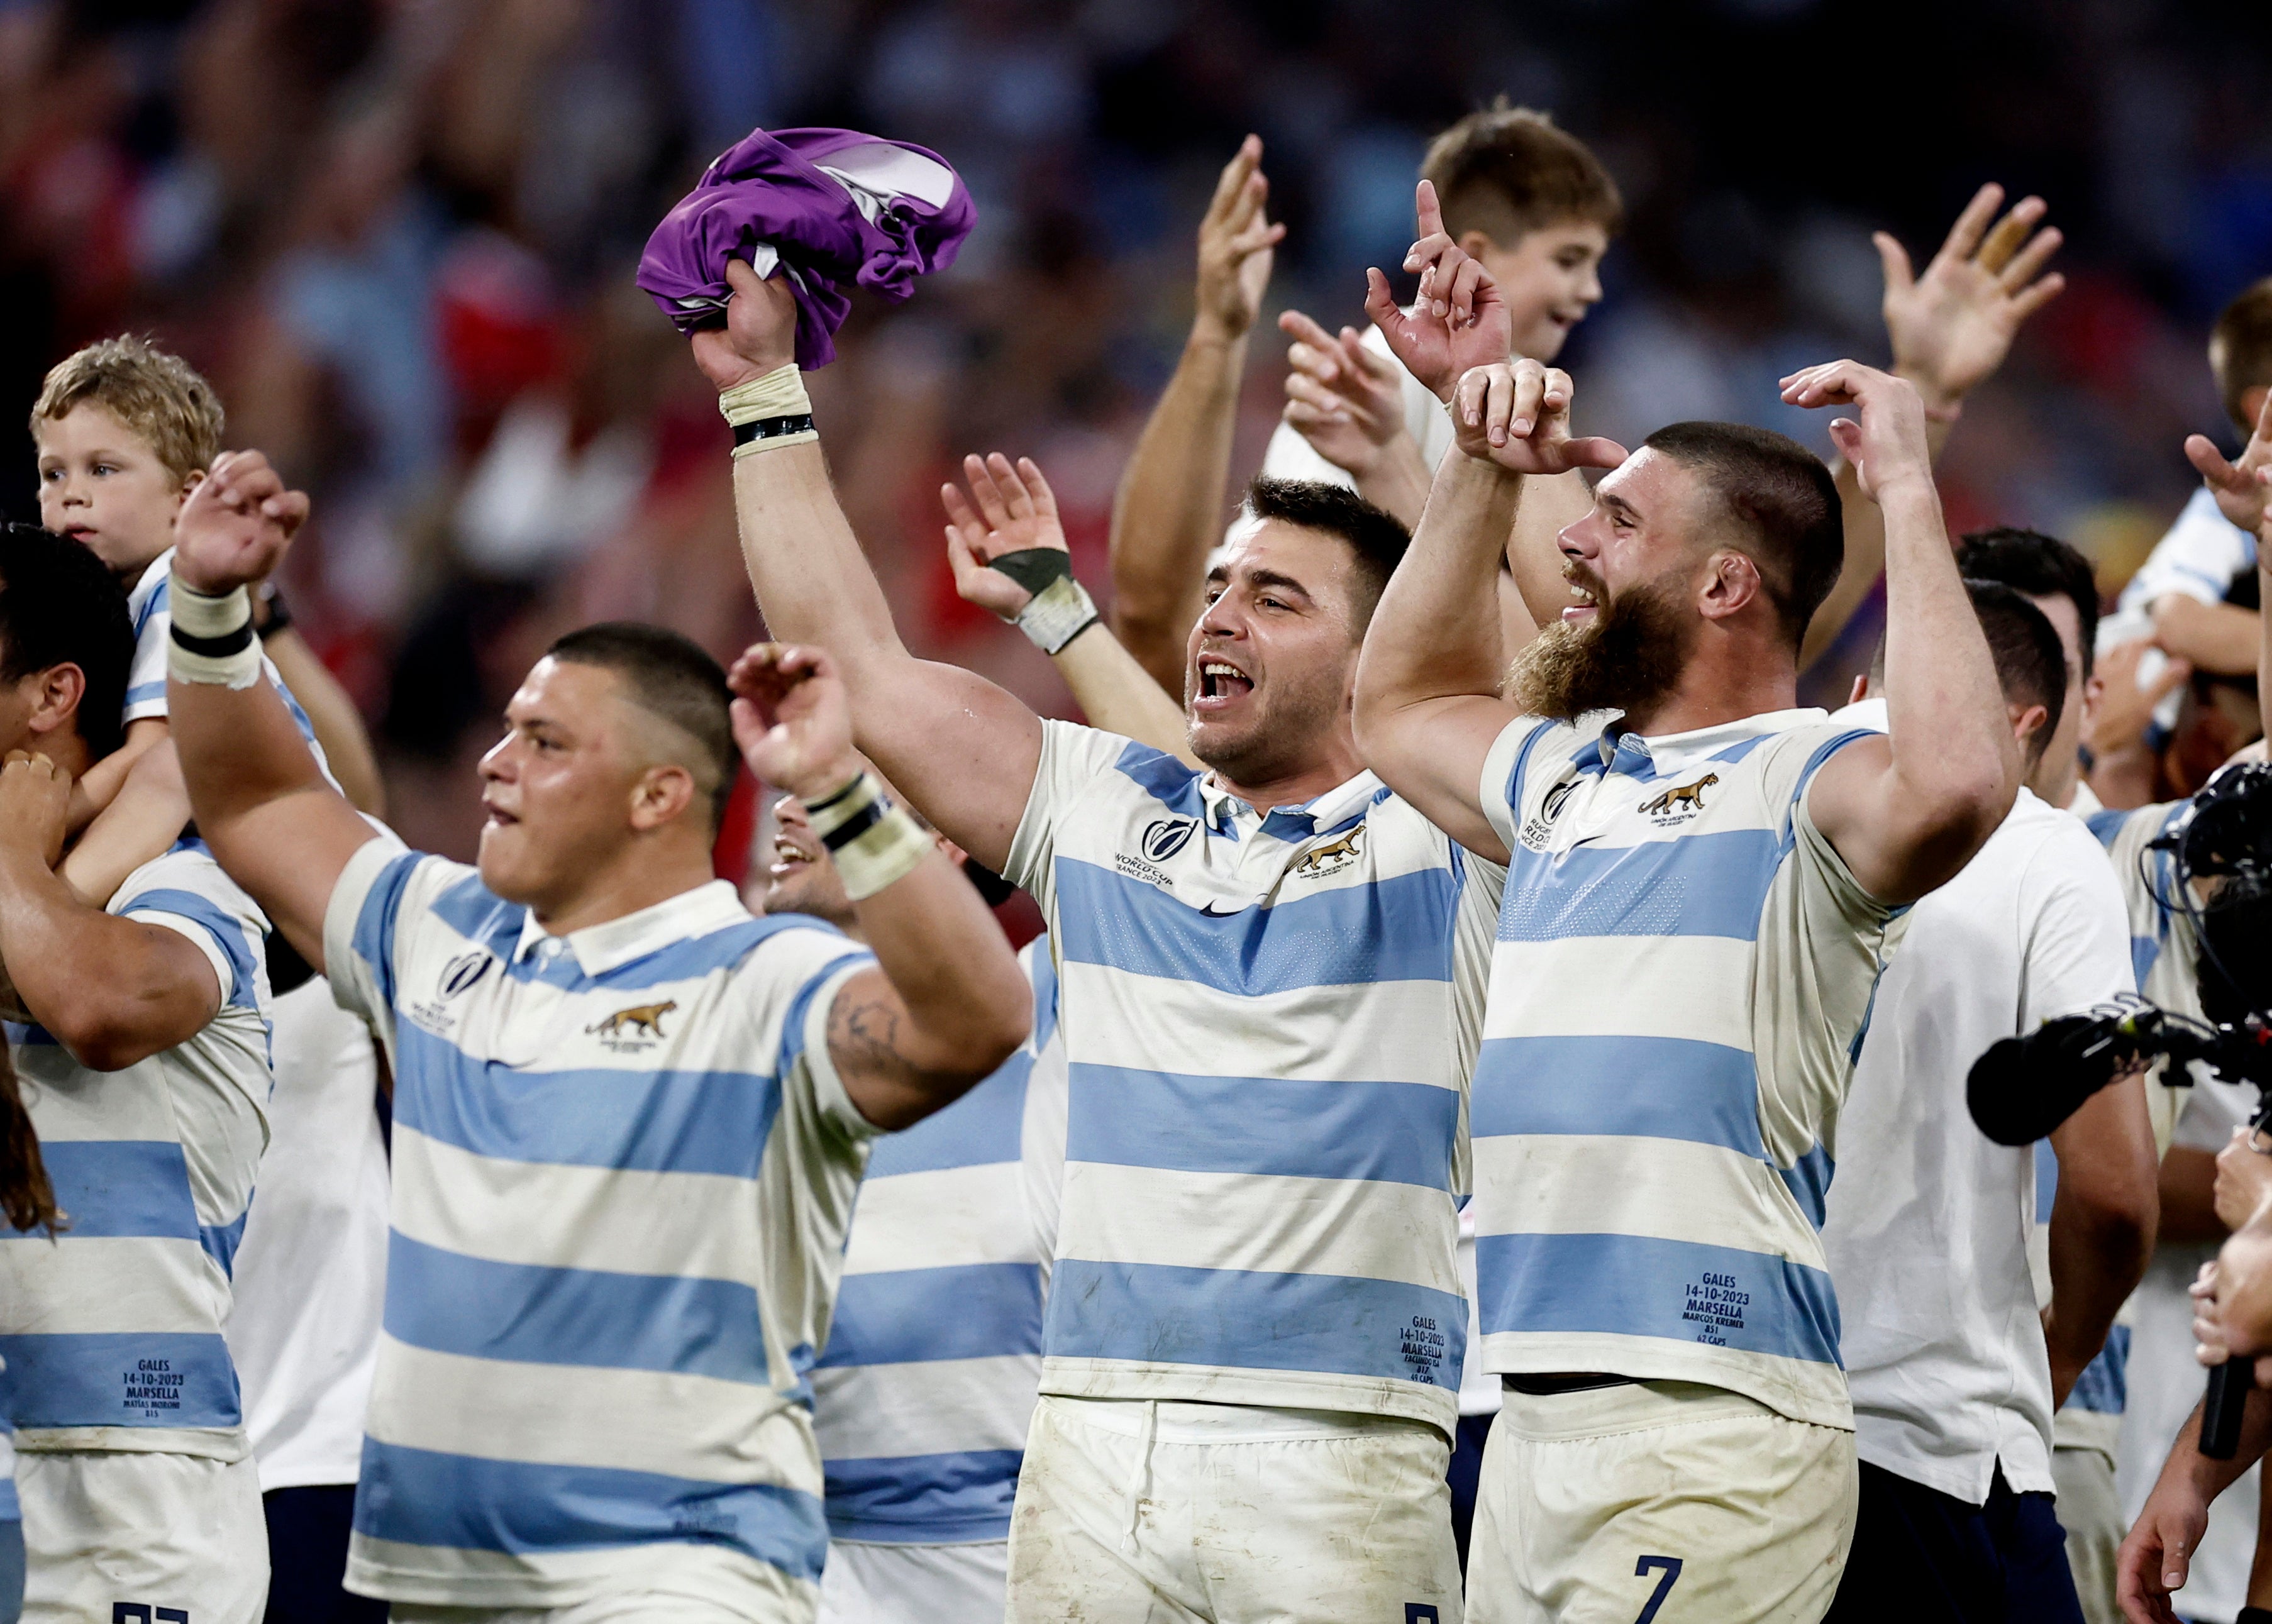 Argentina will hope to shock New Zealand and reach a first World Cup final